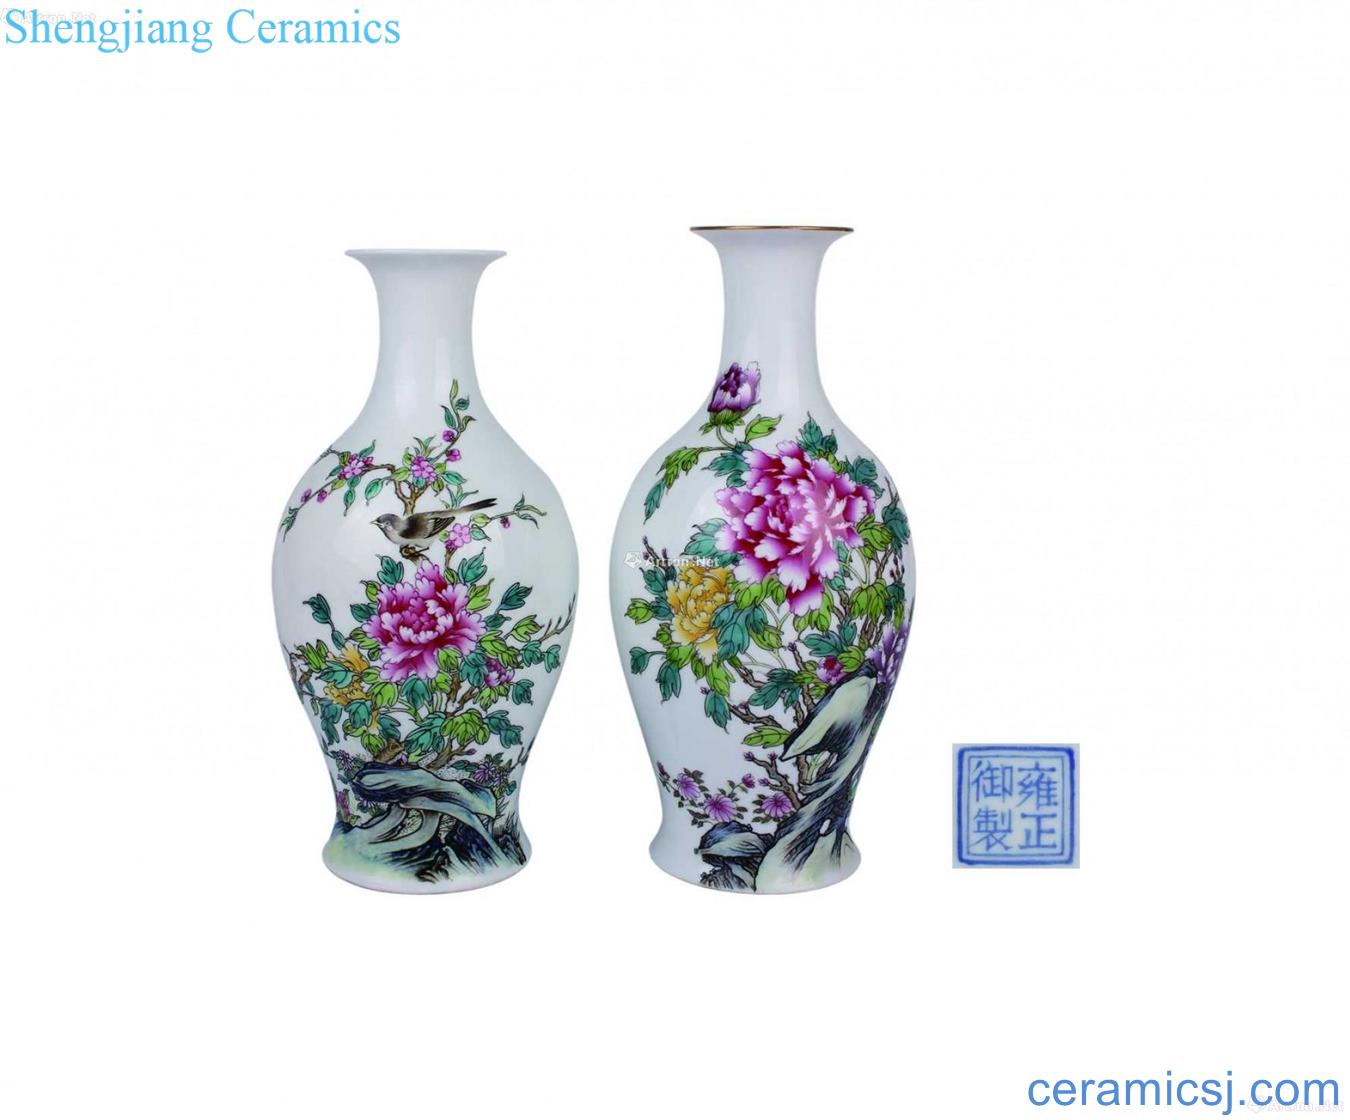 Colored enamel painting of flowers and grain olive bottle